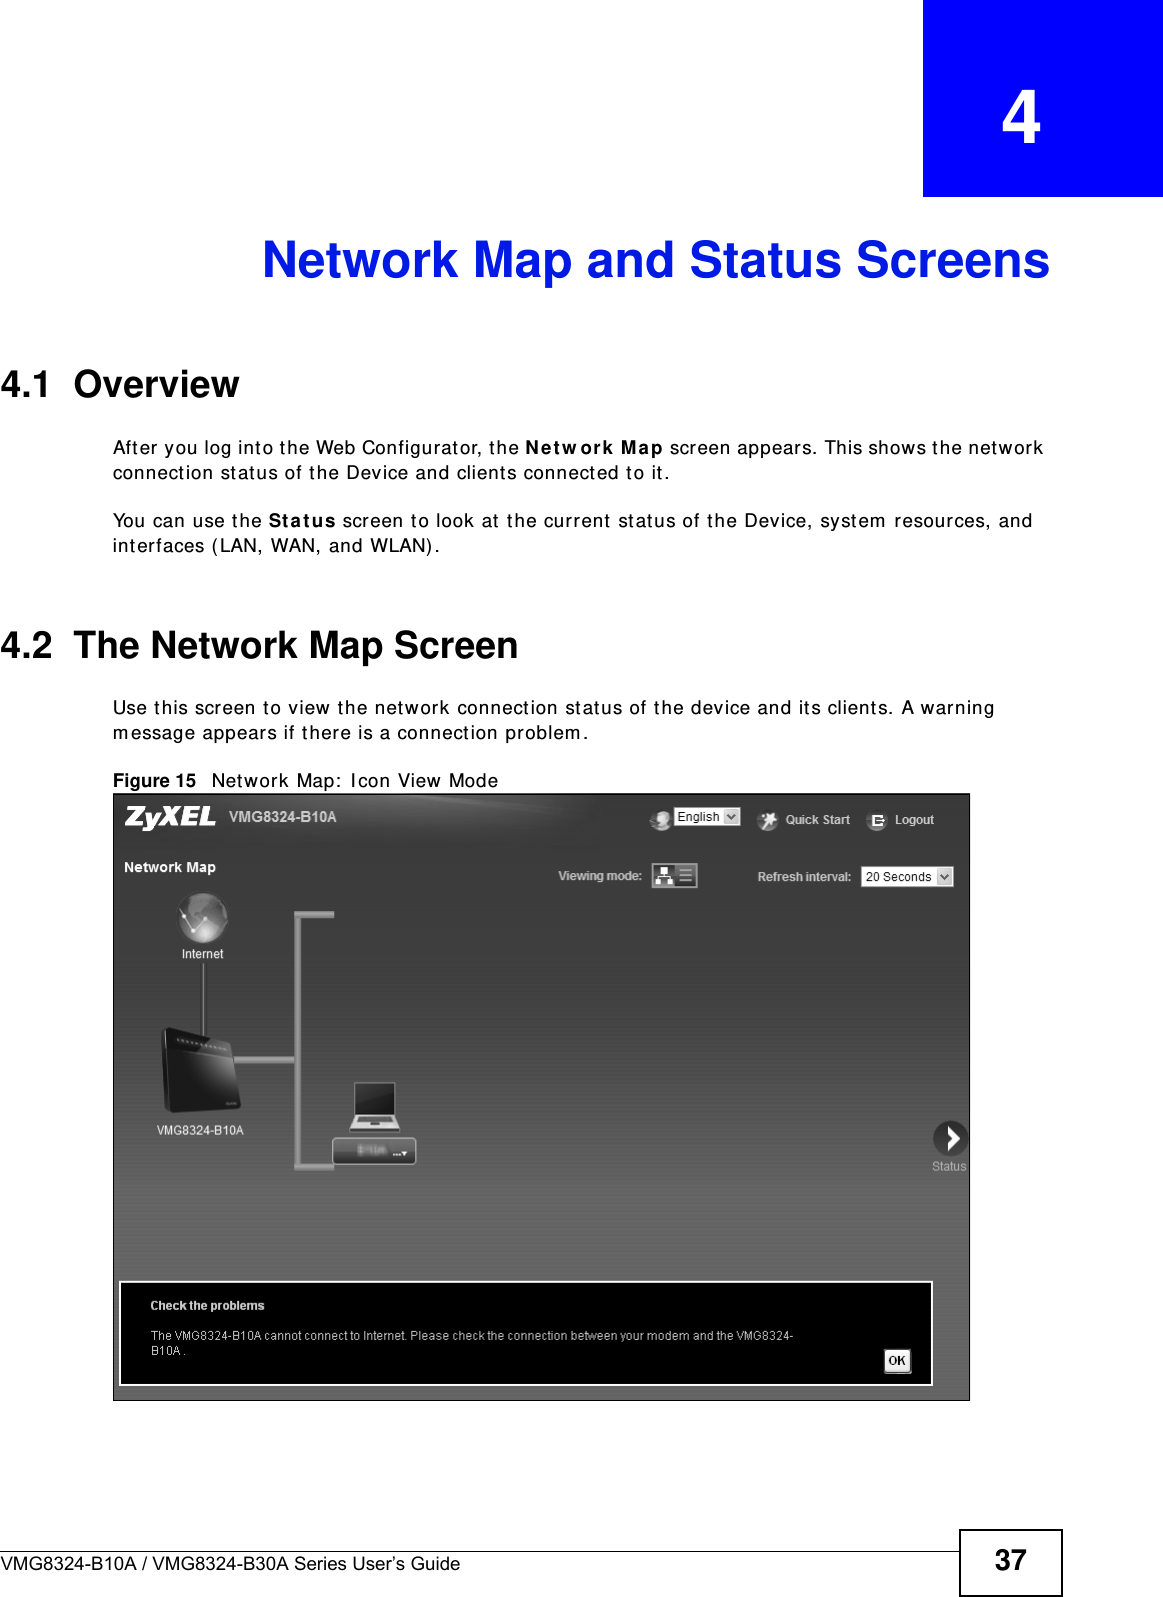 VMG8324-B10A / VMG8324-B30A Series User’s Guide 37CHAPTER   4Network Map and Status Screens4.1  OverviewAft er you log int o t he Web Configurat or, t he Ne t w or k  M a p screen appears. This shows t he network connect ion st at us of t he Device and client s connect ed t o it . You can use t he St a t u s screen t o look at  t he current  stat us of the Device, syst em  resources, and int erfaces ( LAN, WAN, and WLAN) . 4.2  The Network Map ScreenUse t his screen to view t he net work connect ion st at us of the device and its client s. A warning m essage appears if t here is a connection problem . Figure 15   Net work Map:  I con View Mode 